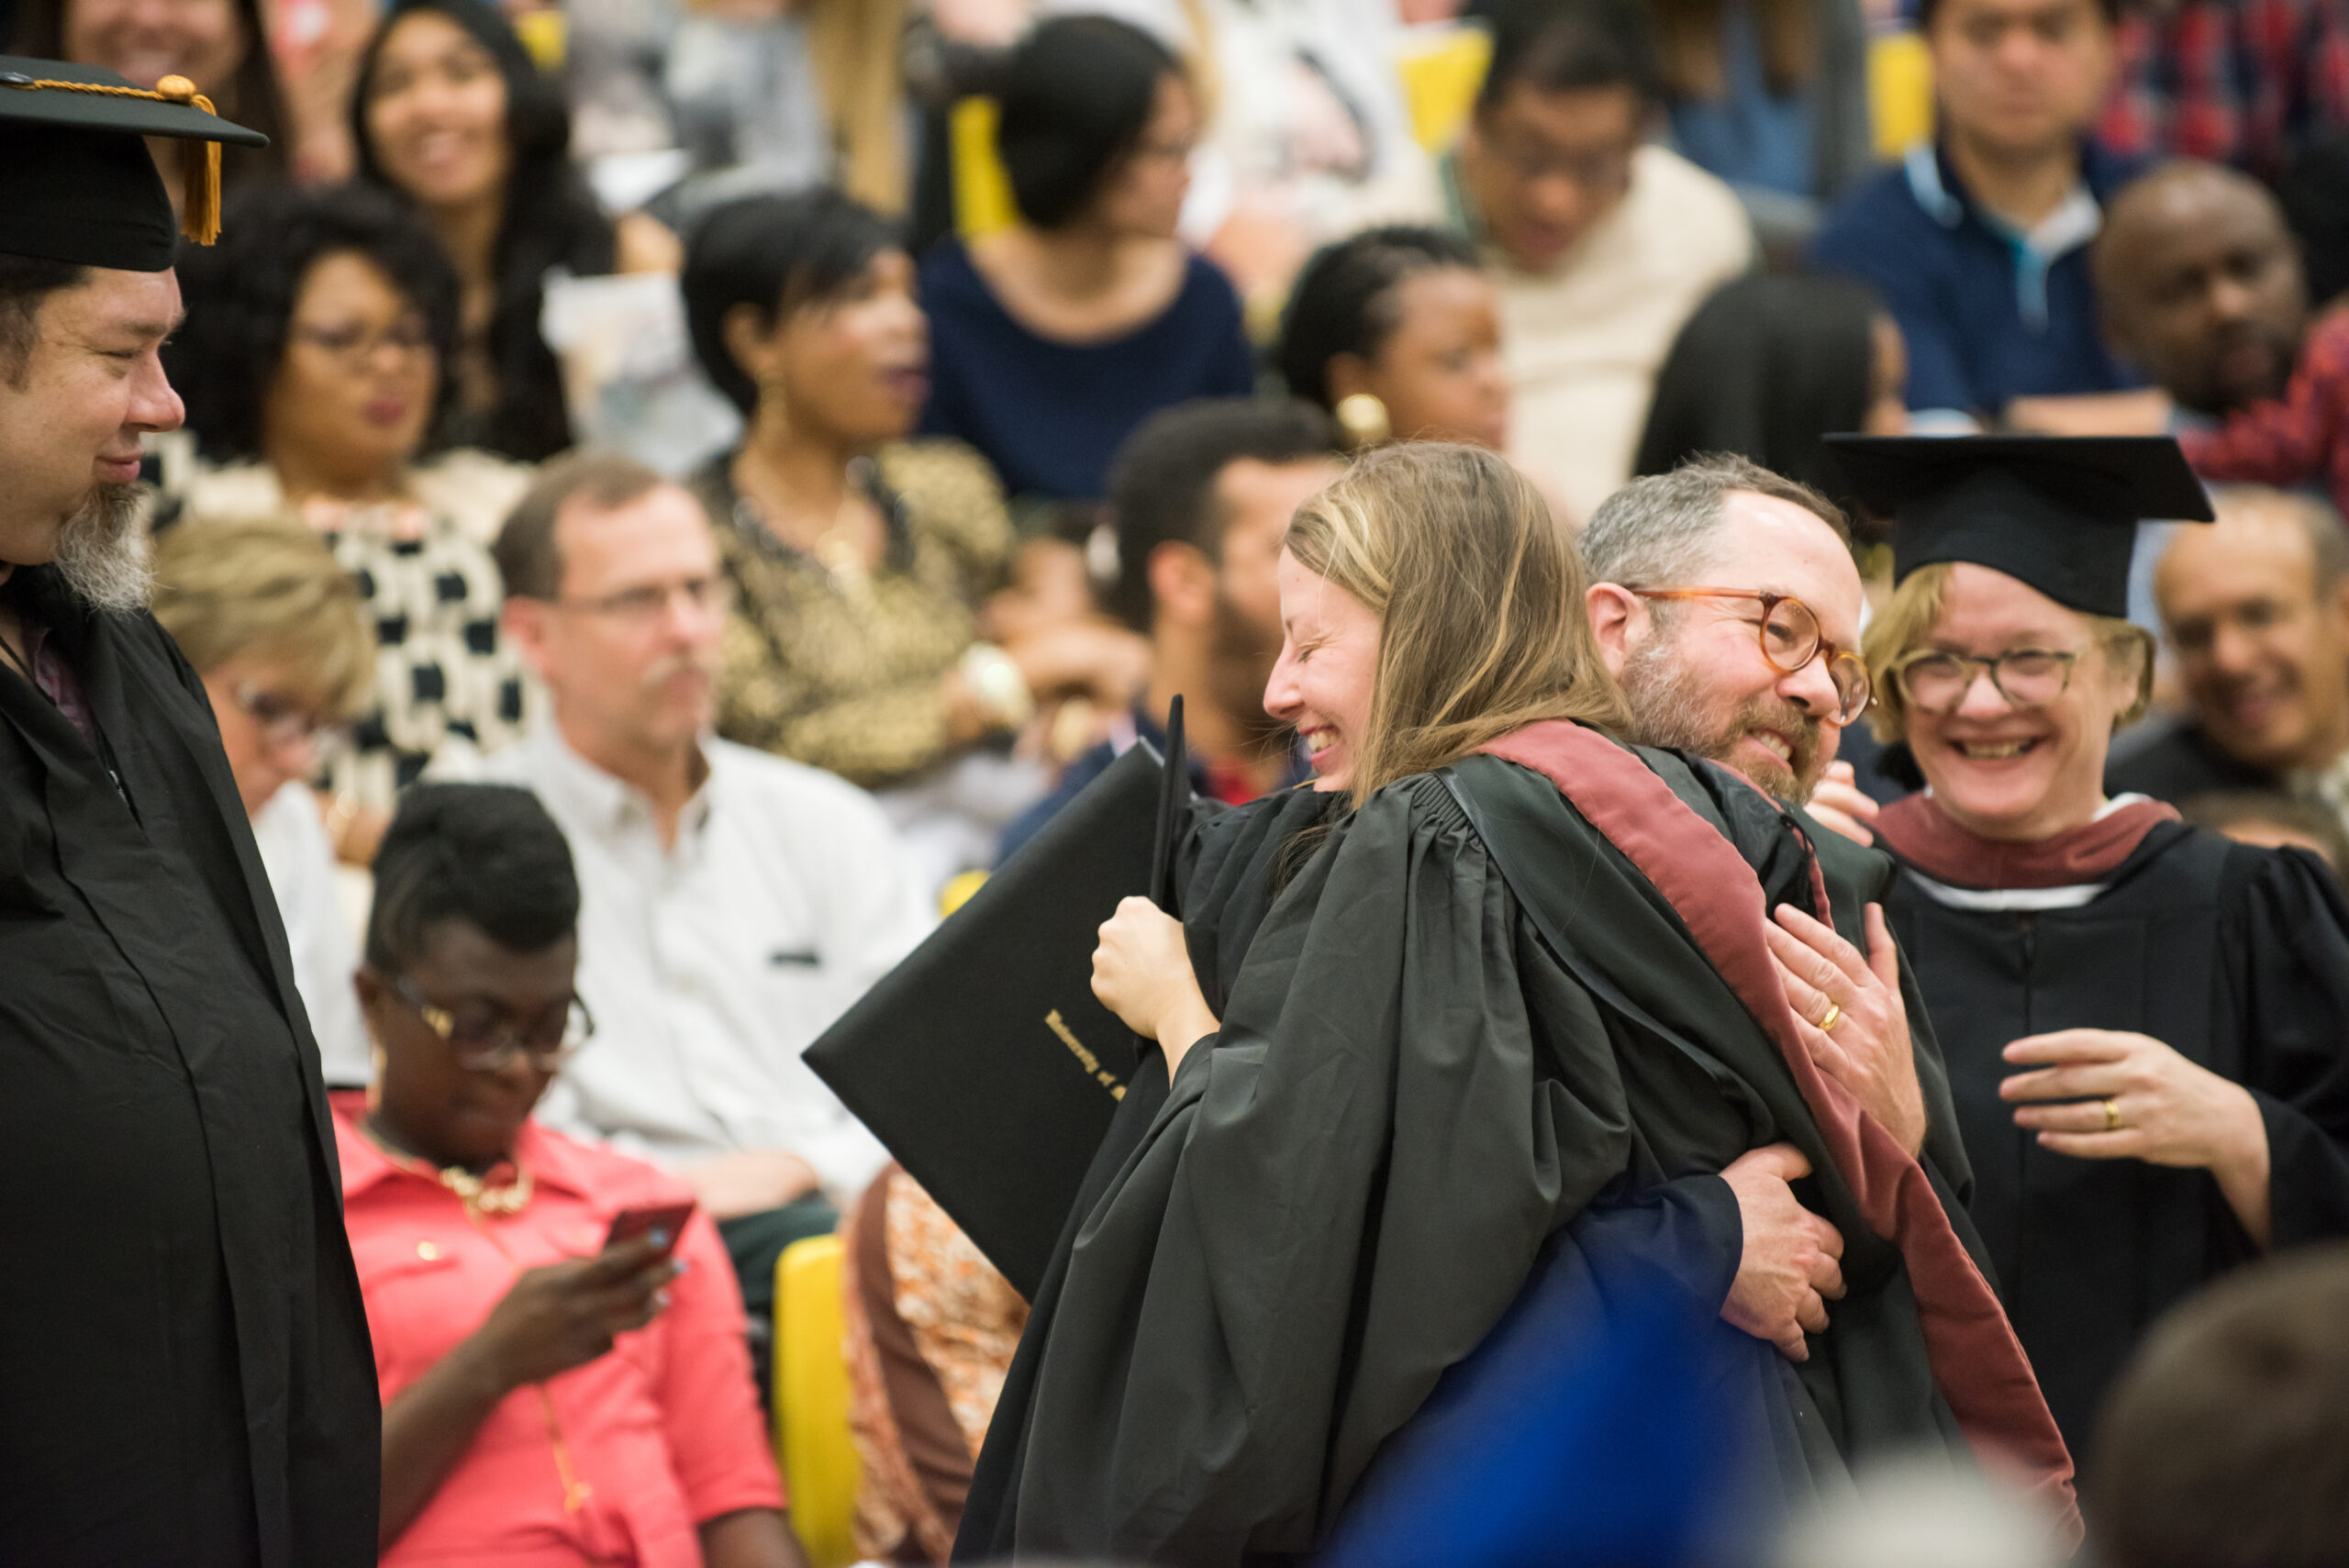 UMBC’s spring 2017 commencement honors each student’s story of achievement